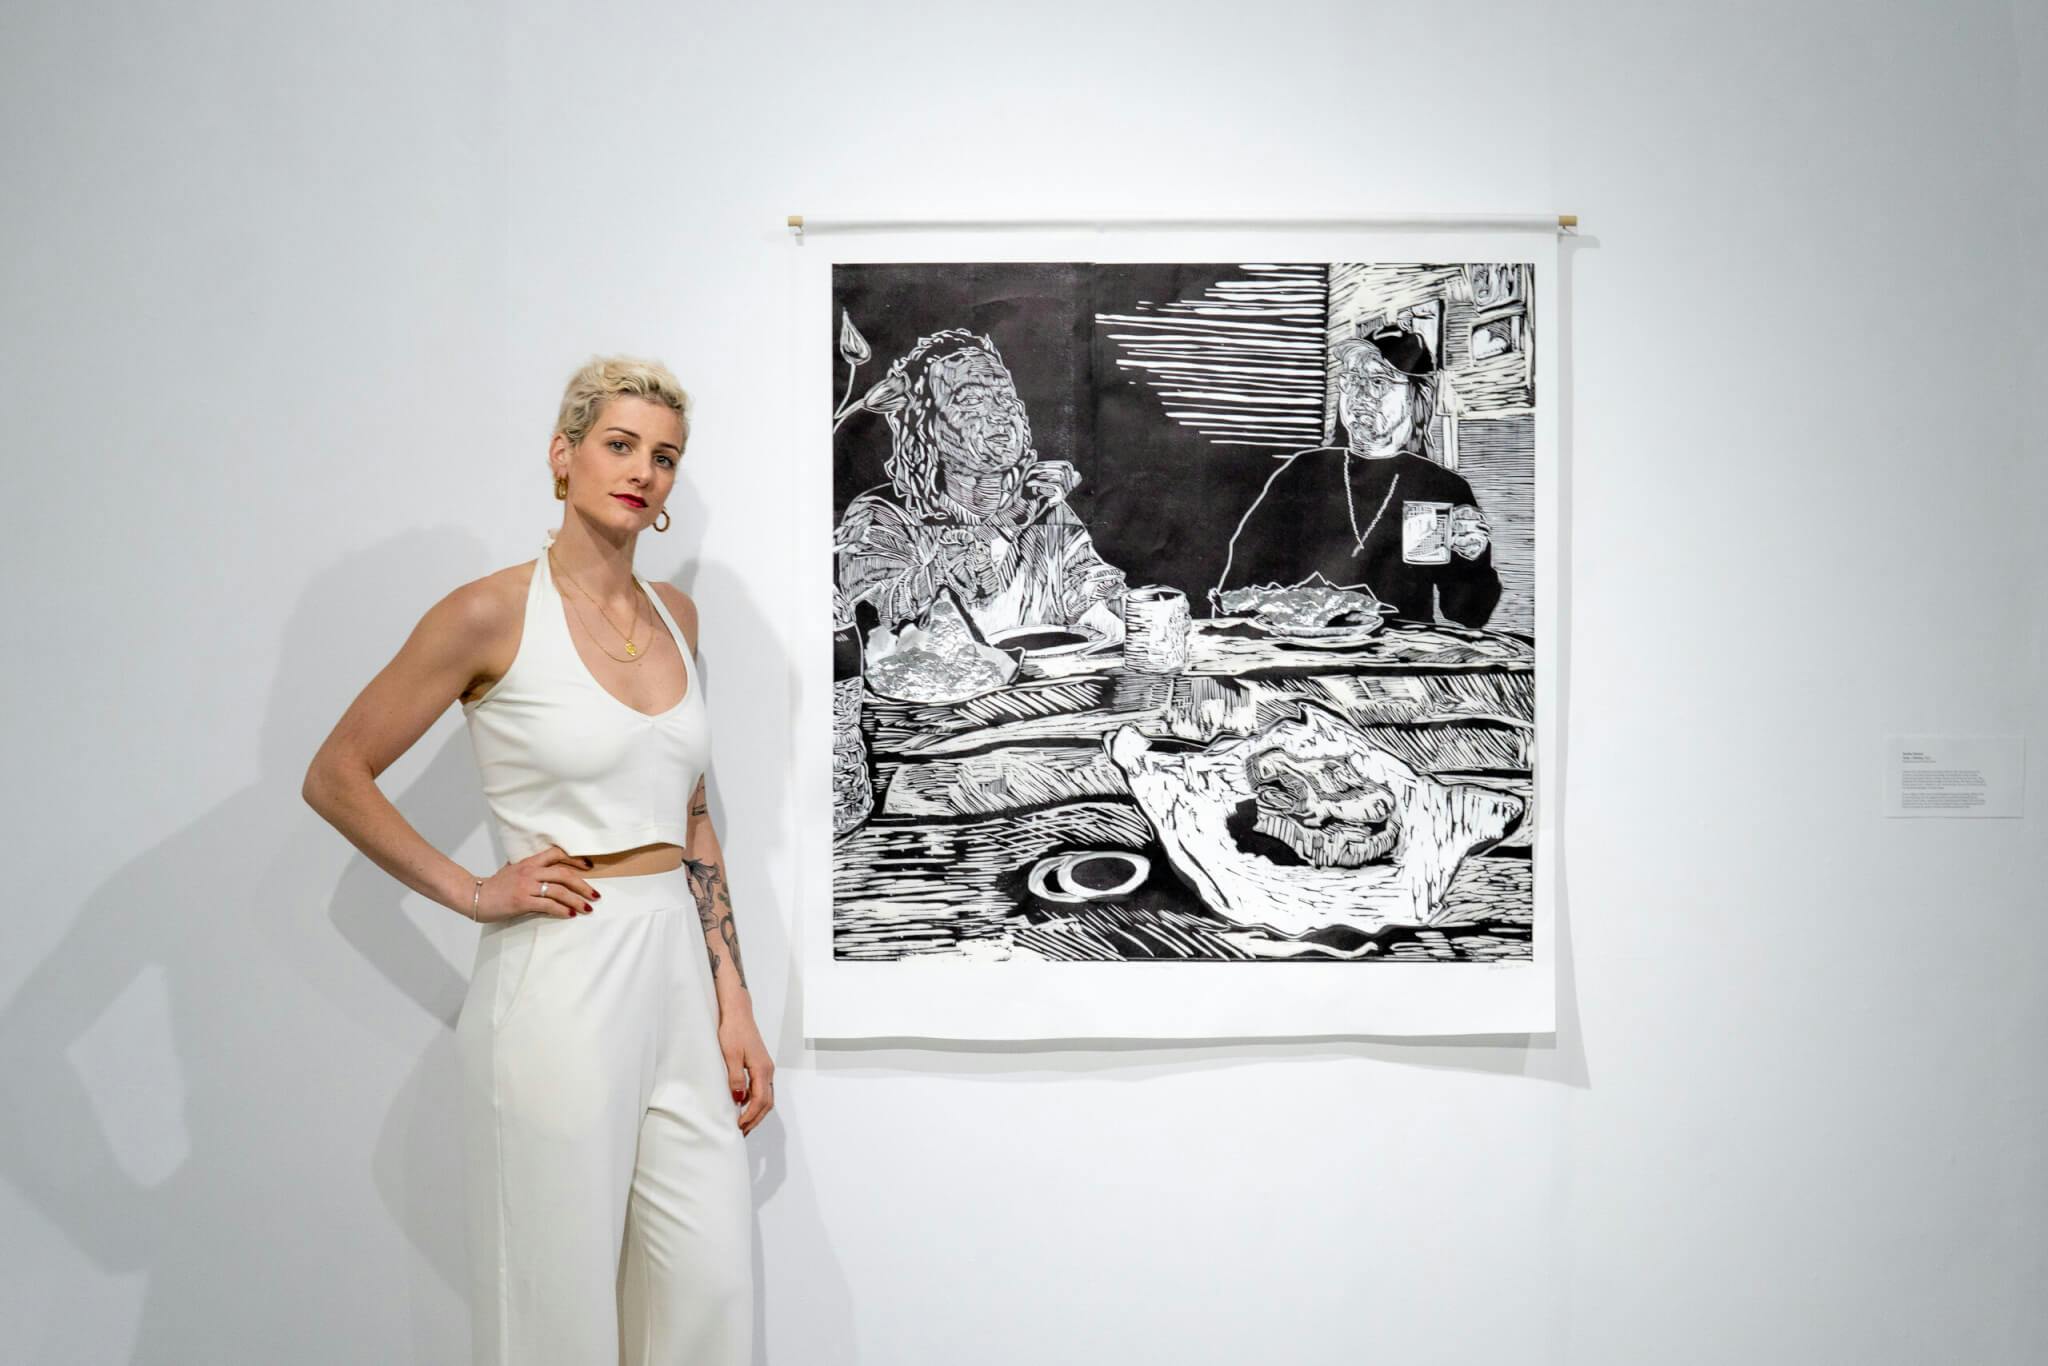 Artist Brooke Stewart, wearing white, stands beside black and white artwork positioned on the wall.